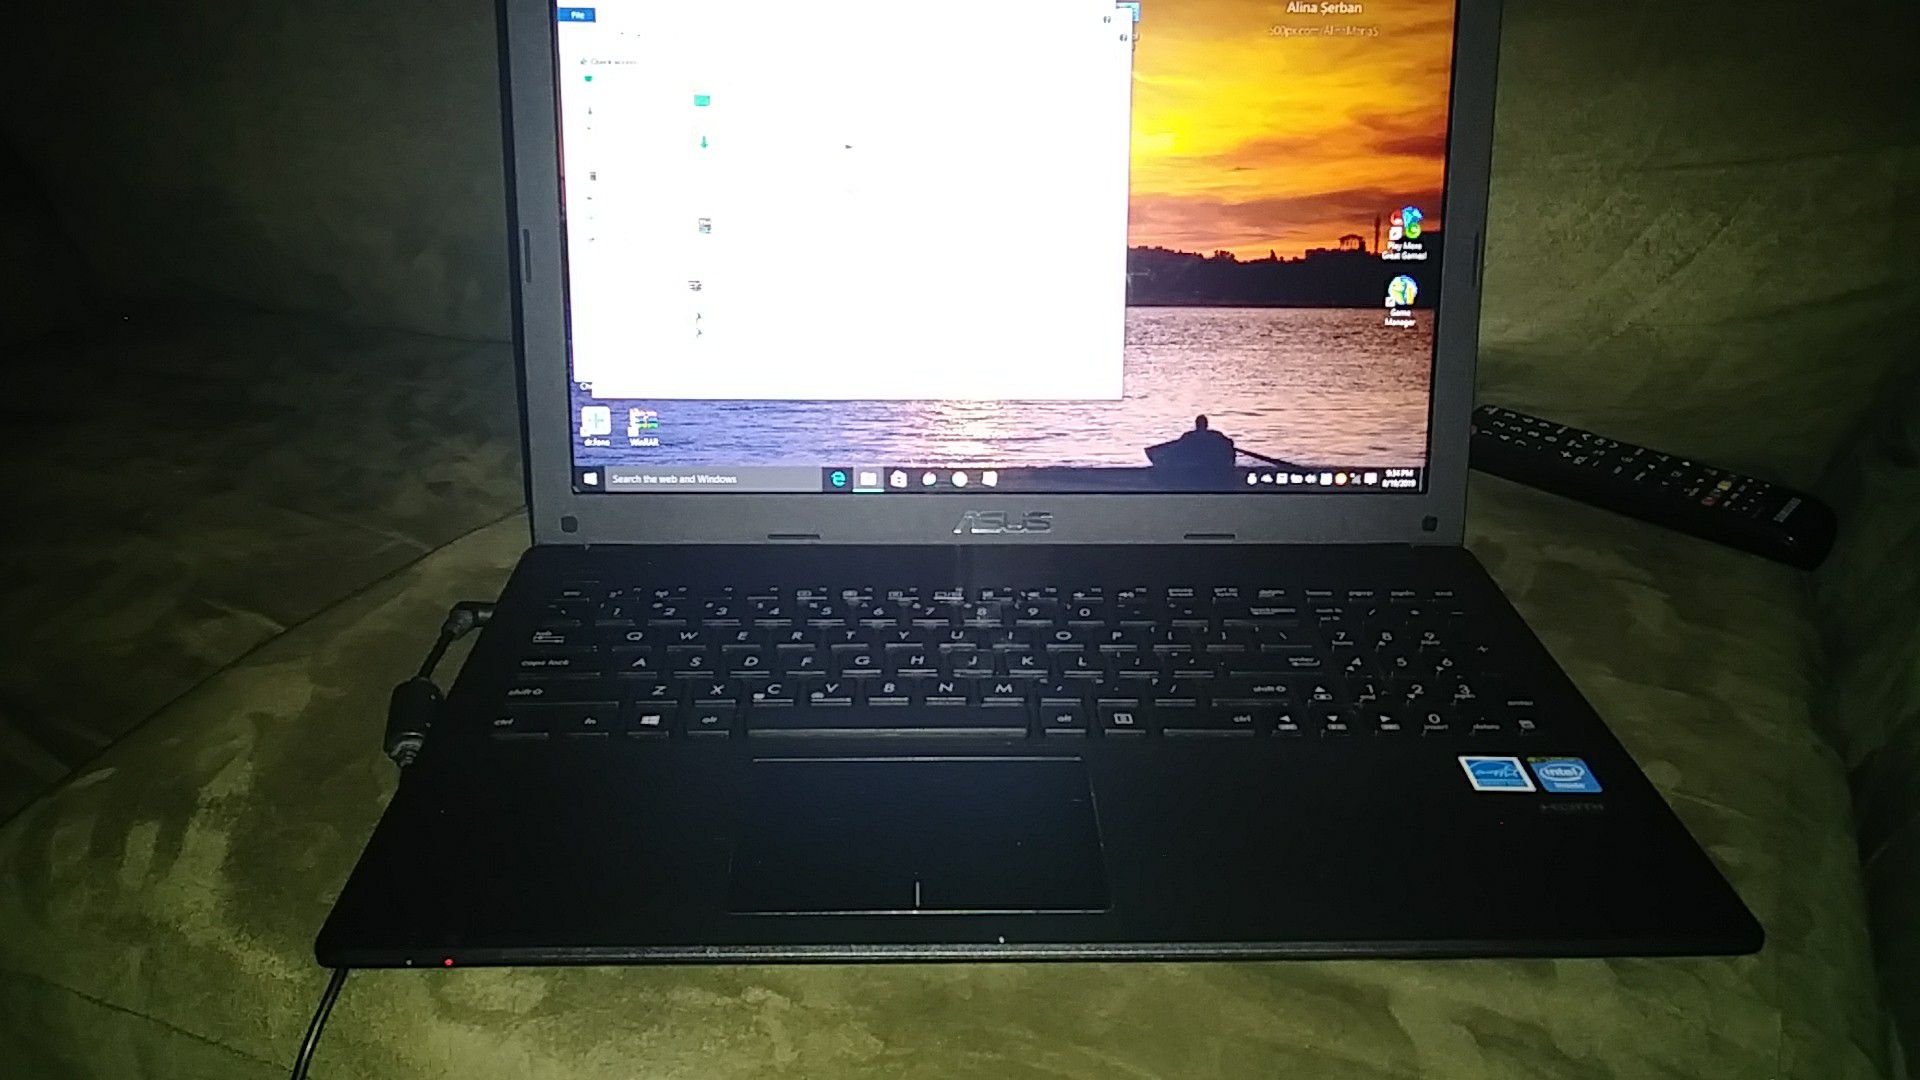 Almost new Asus x551m laptop